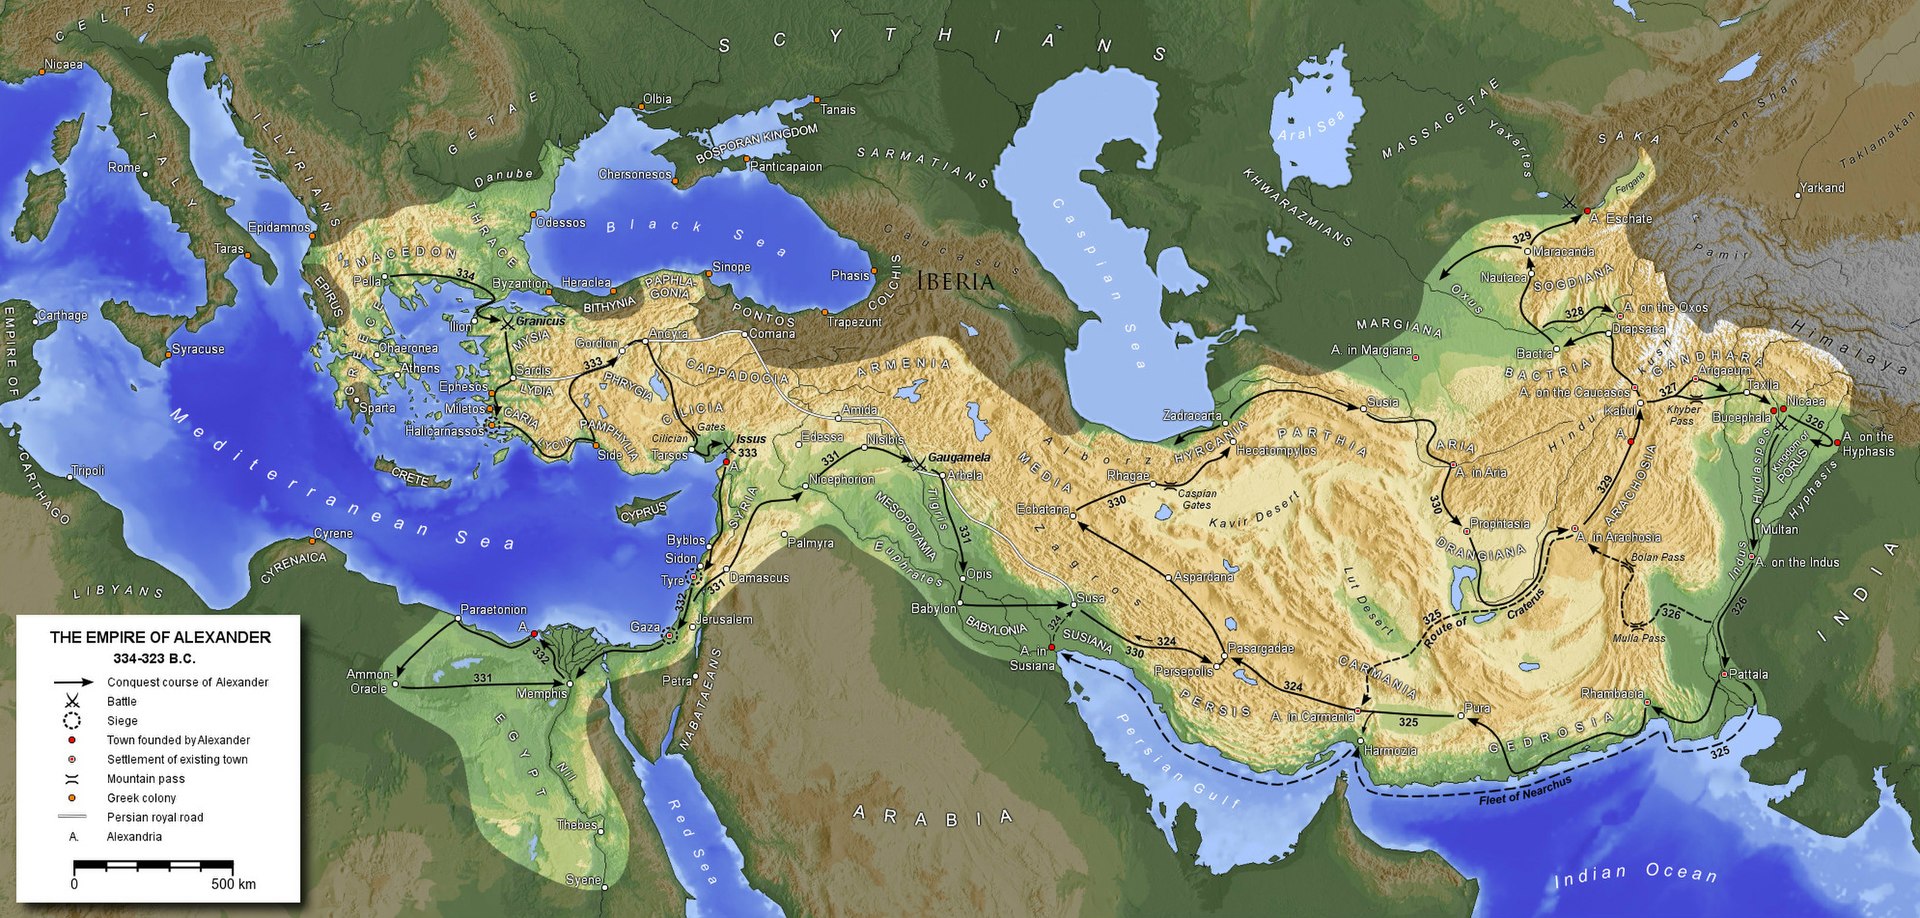 Map of Alexander the Great's conquests from Egypt to India